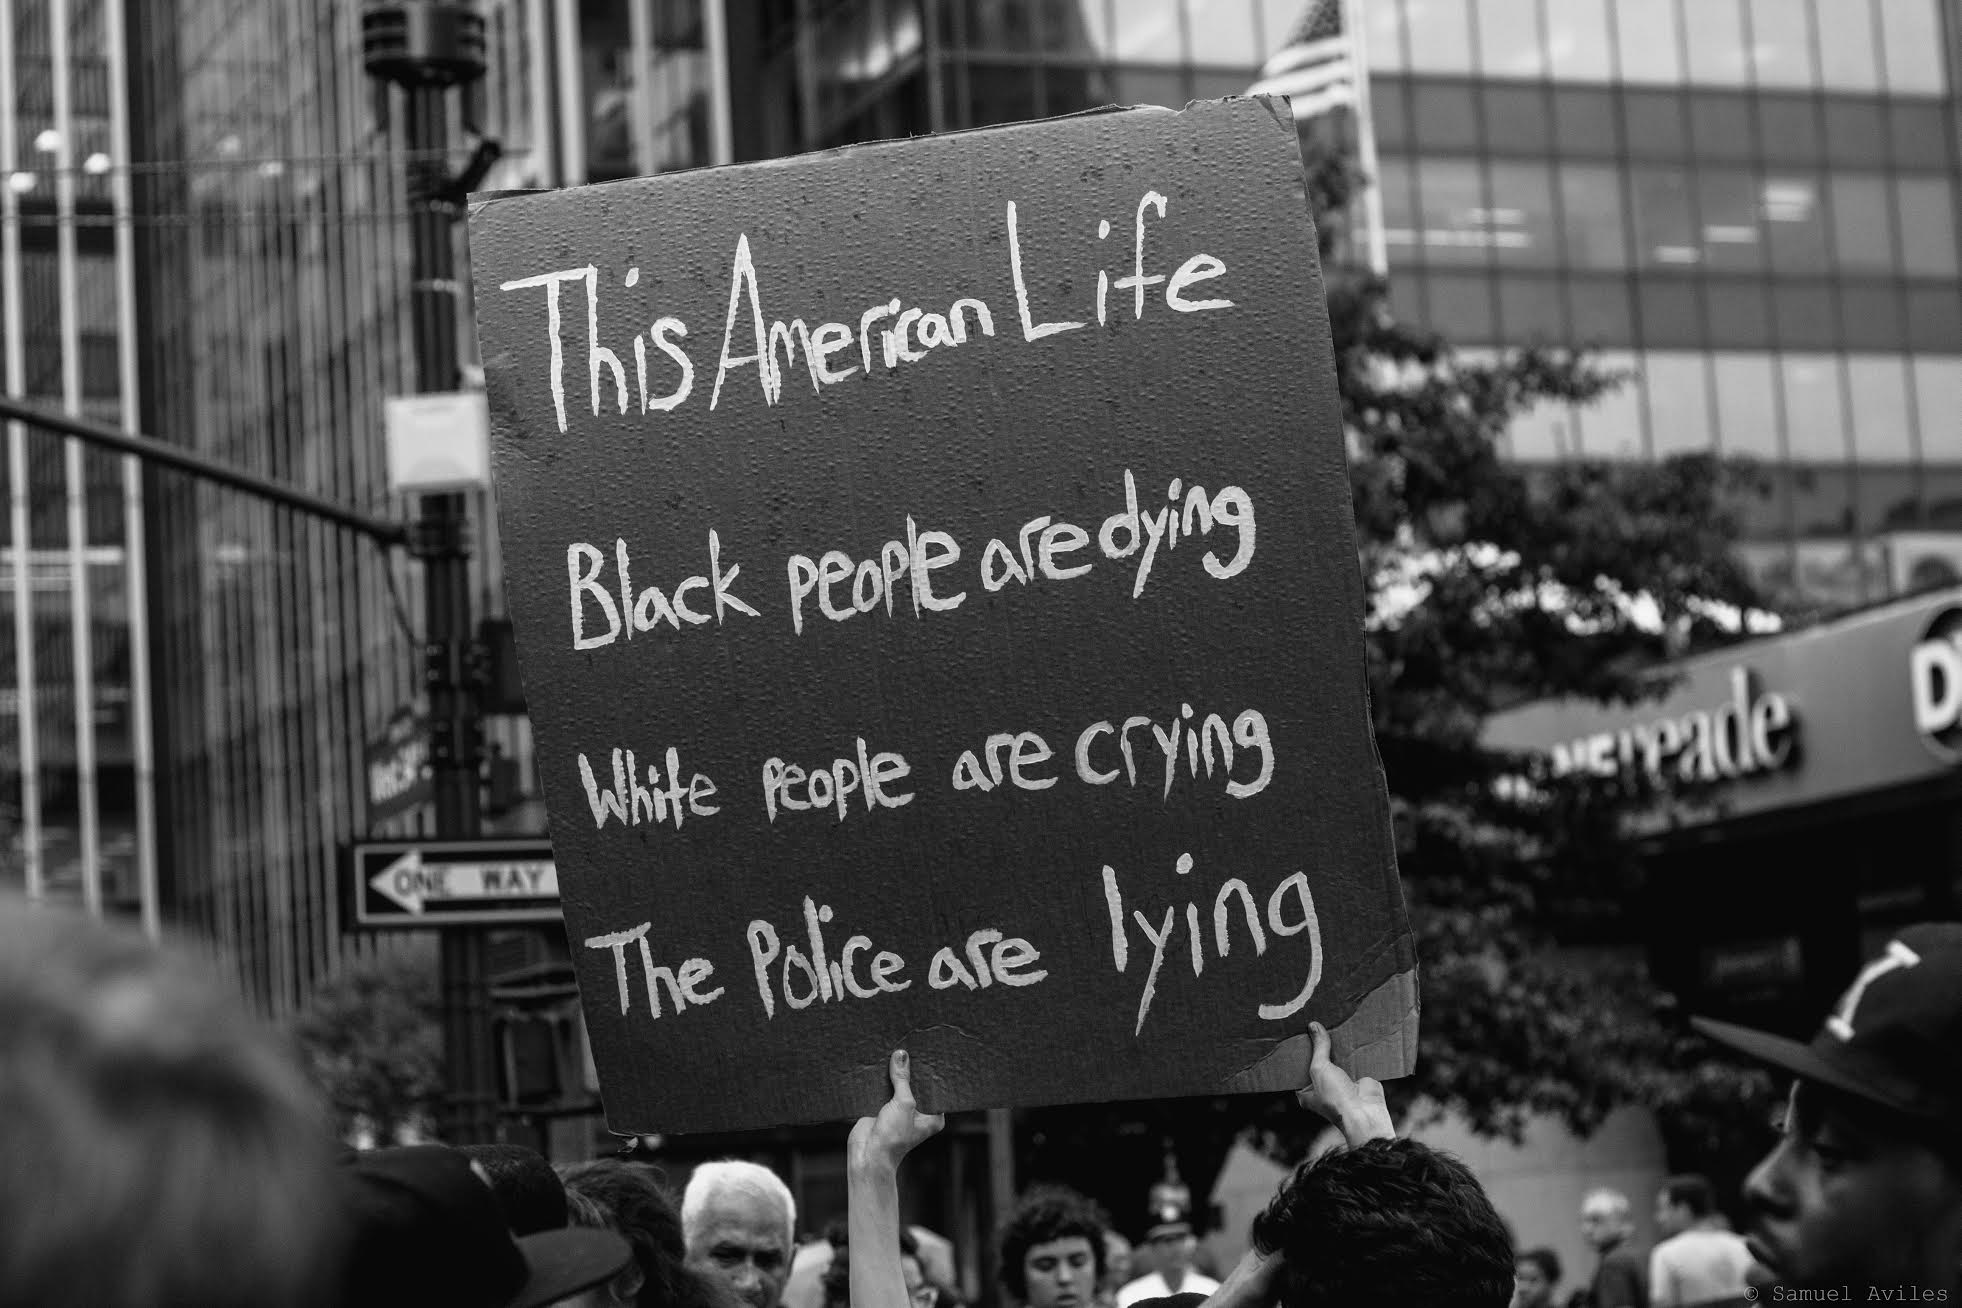 Sign at the July 7th protest against police brutality in Manhattan, New York. The sign references the innocent black people killed by police.